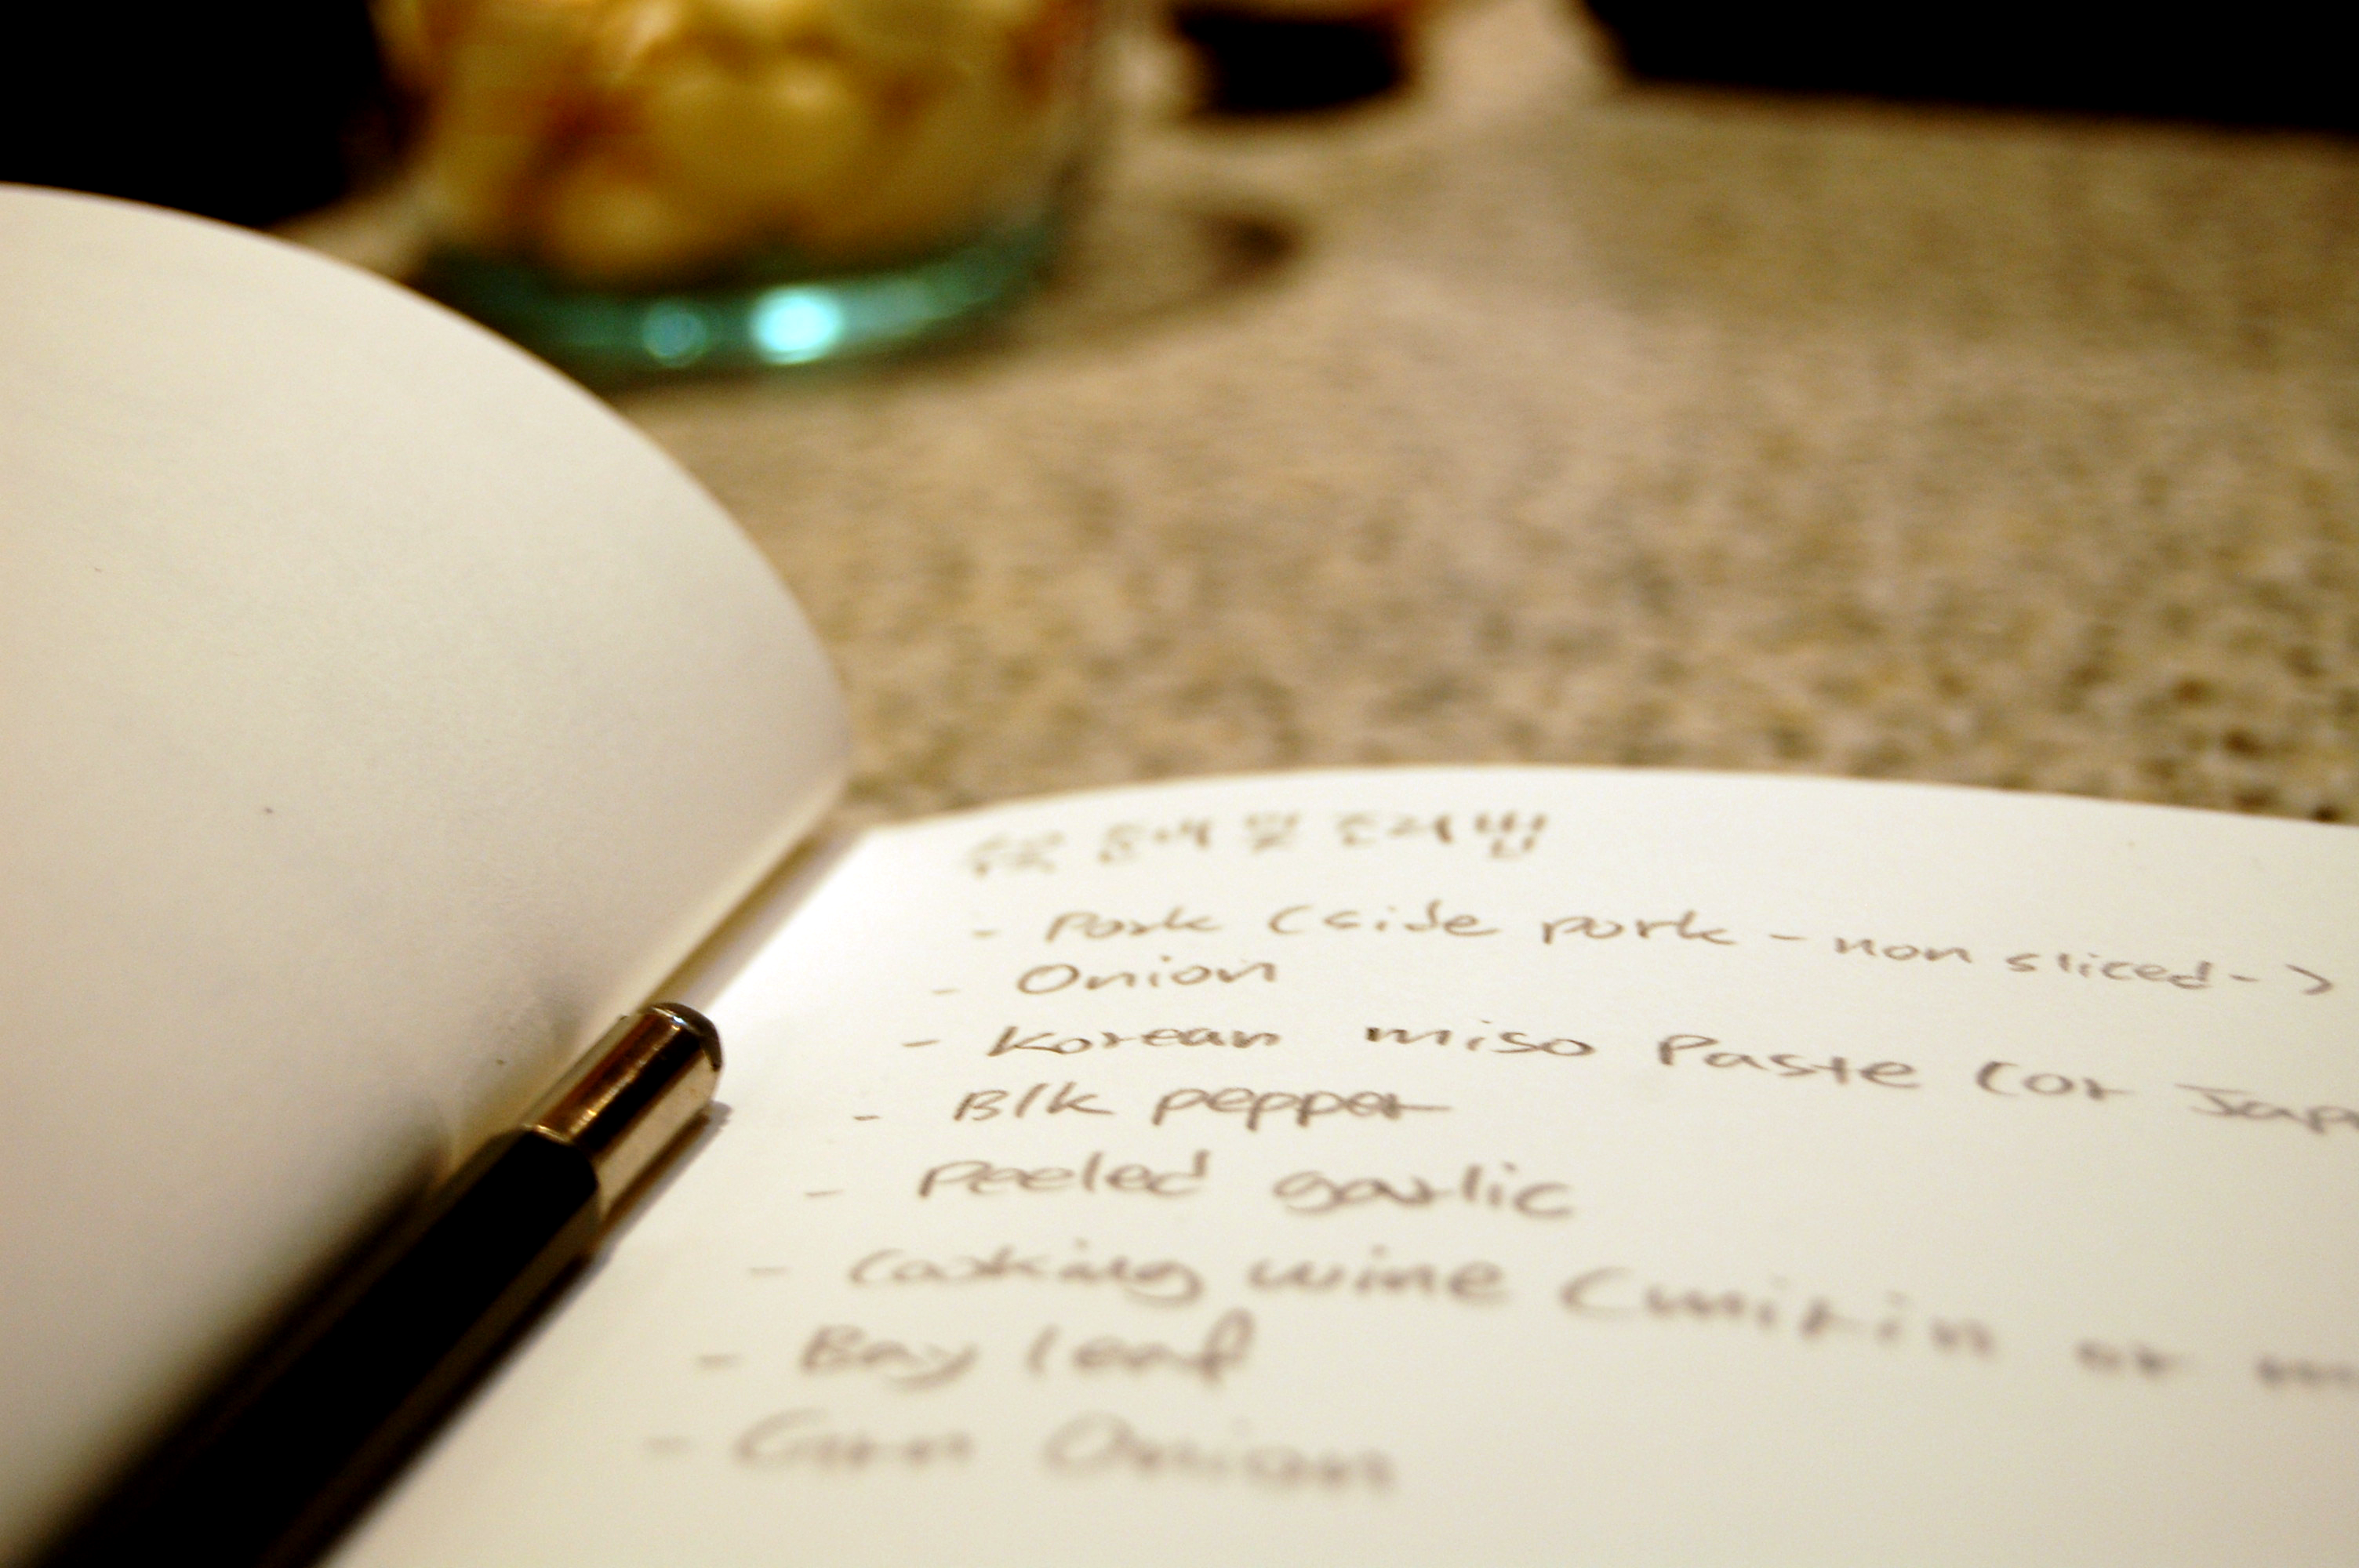 DJ Choi’s notebook sits on the counter with handwritten recipe notes.